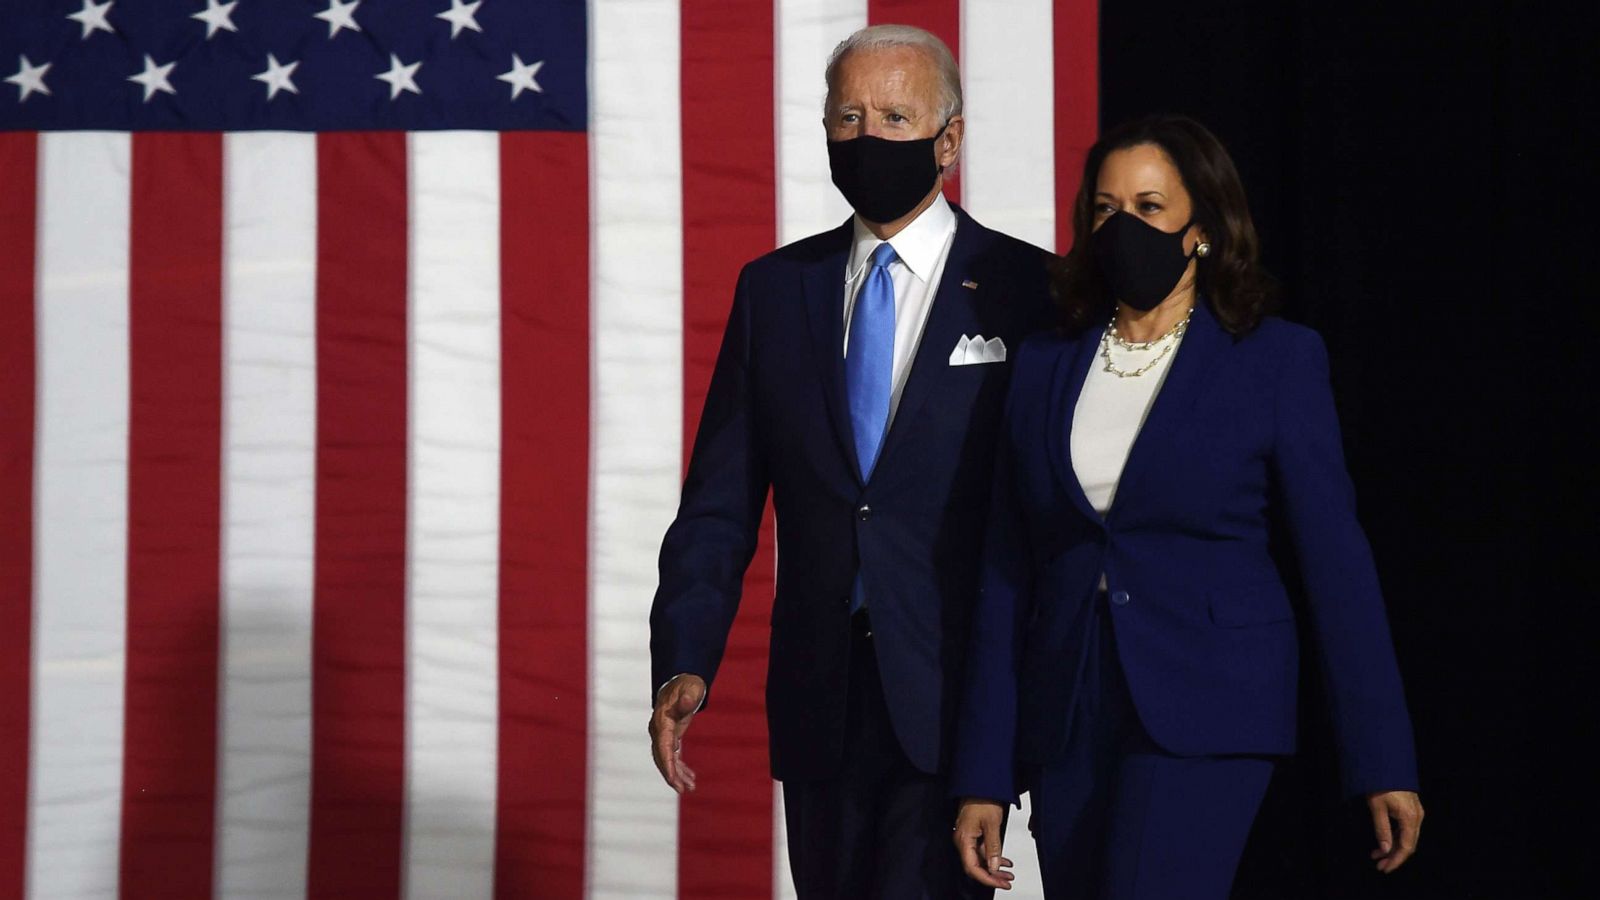 Biden and Harris make 1st appearance as historic Democratic ticket